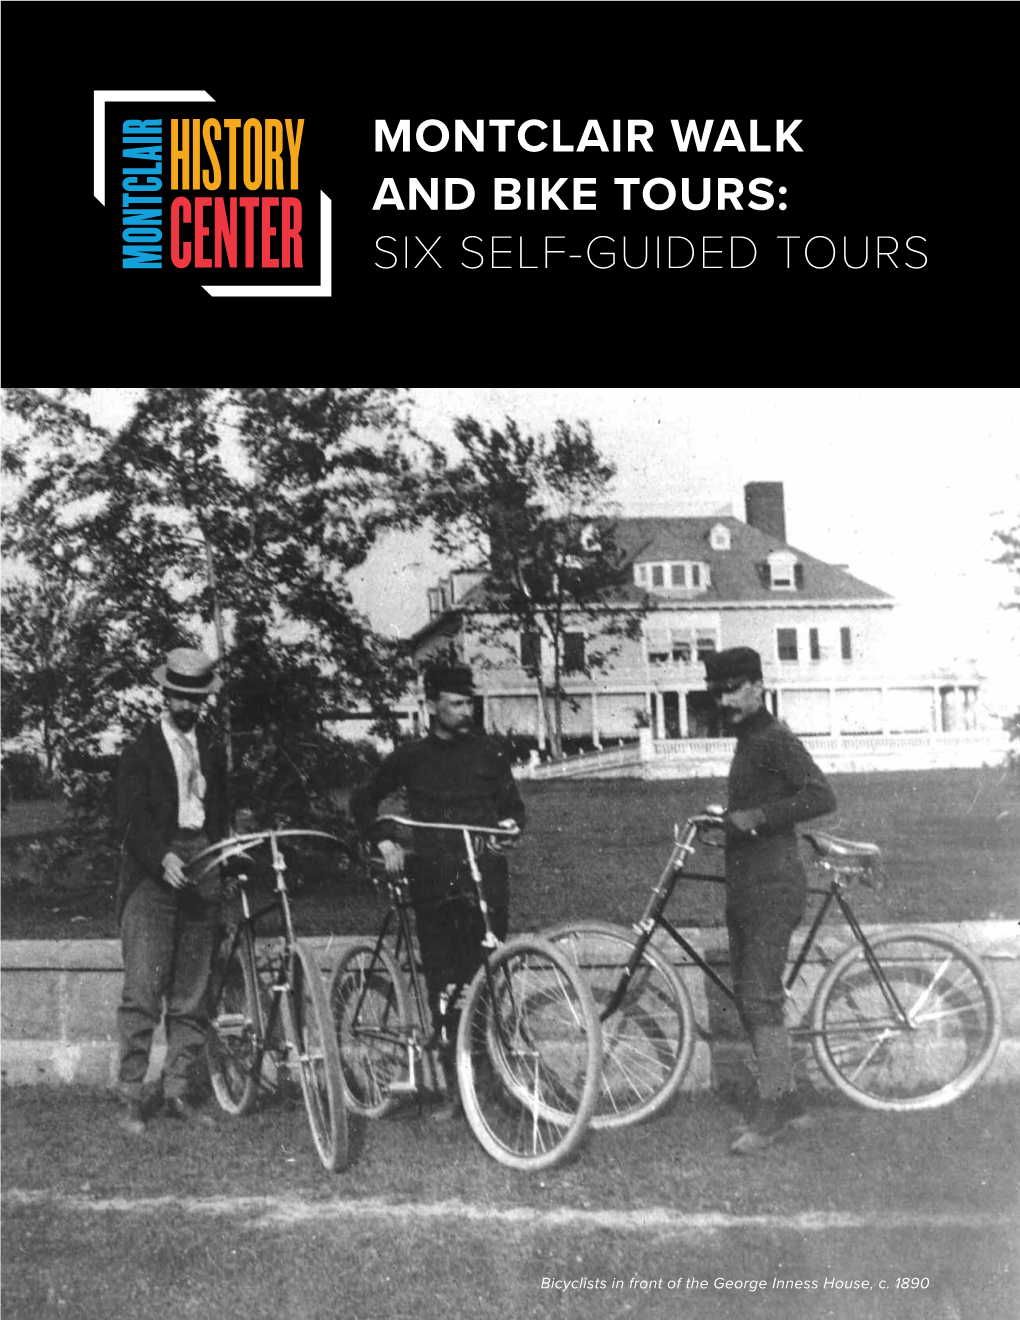 Montclair Walk and Bike Tours: Six Self-Guided Tours